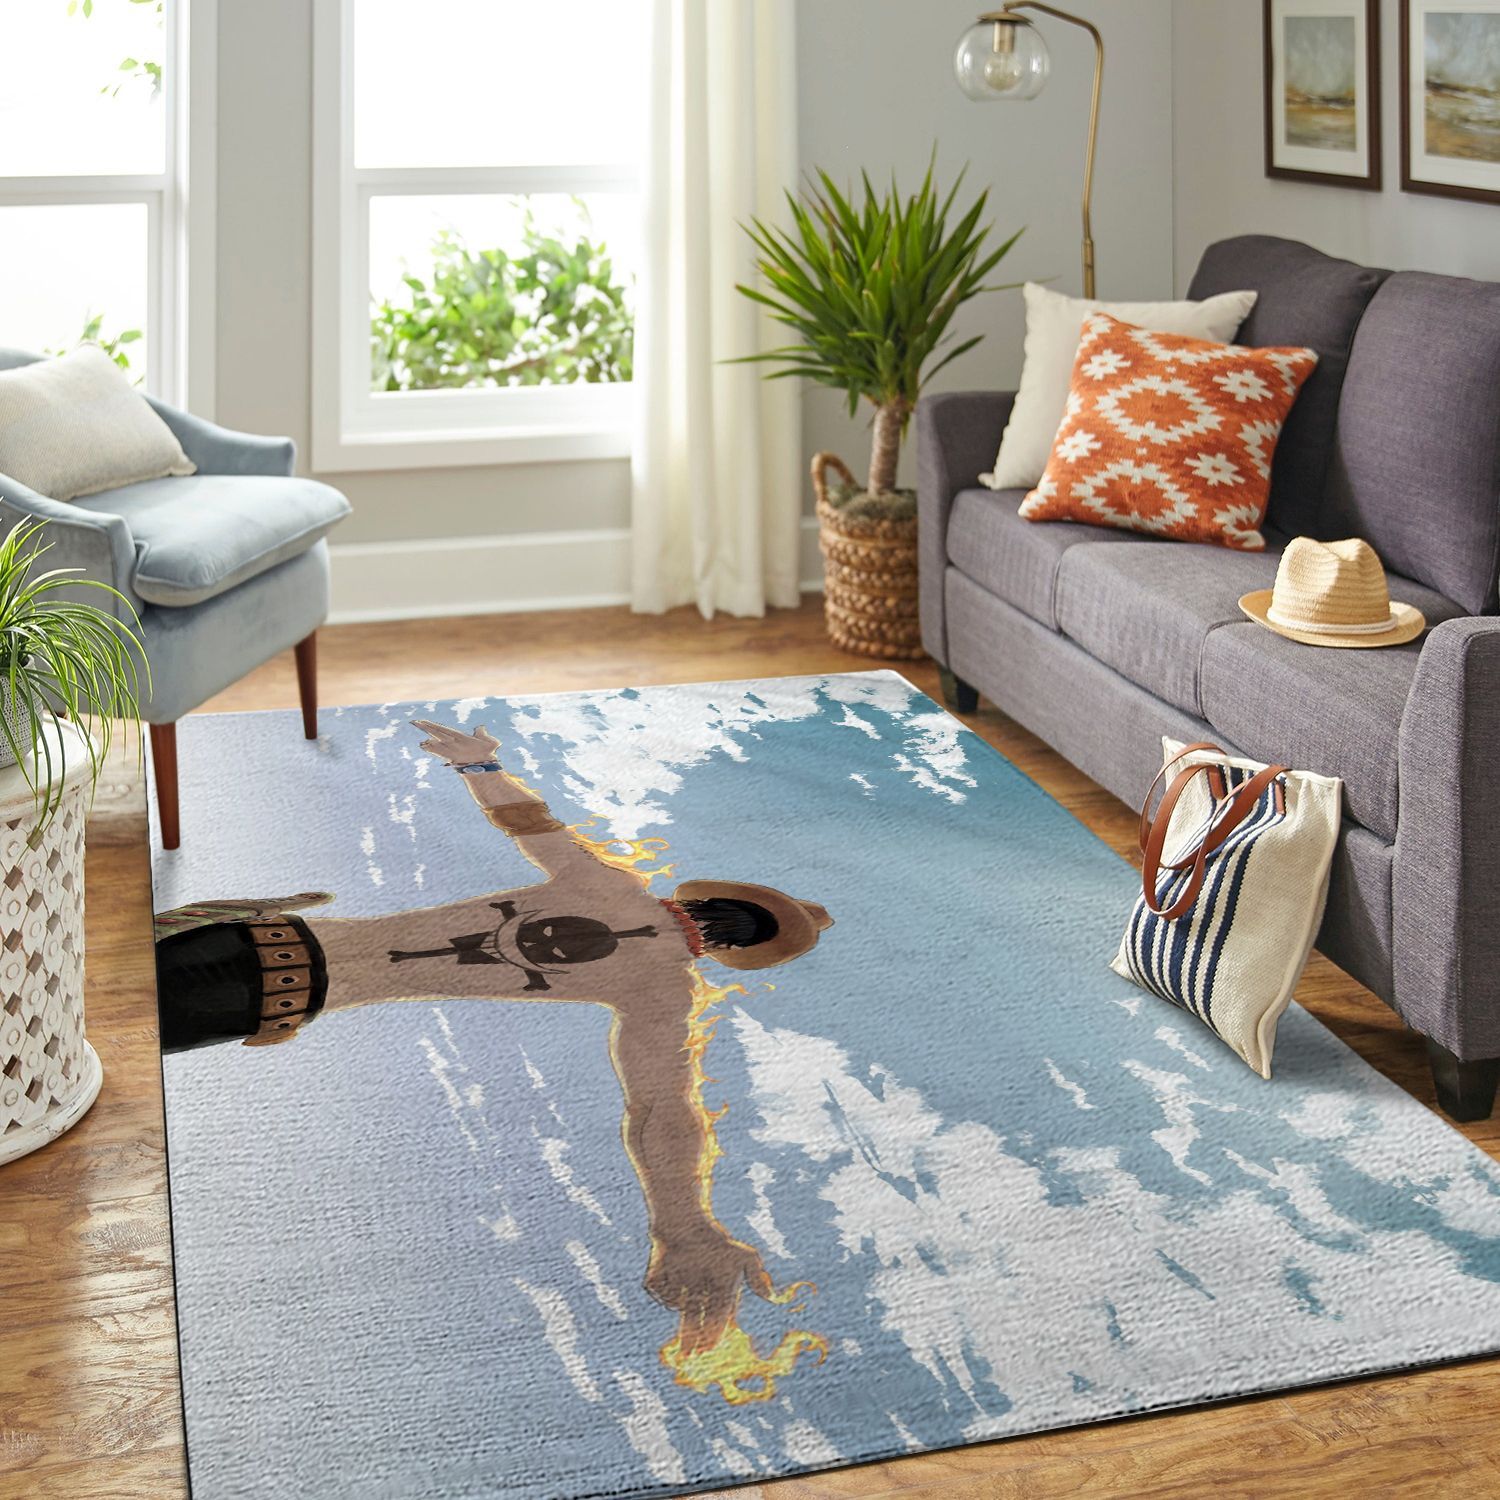 Amazon Onepiece-luffy Living Room Area No6436 Rug